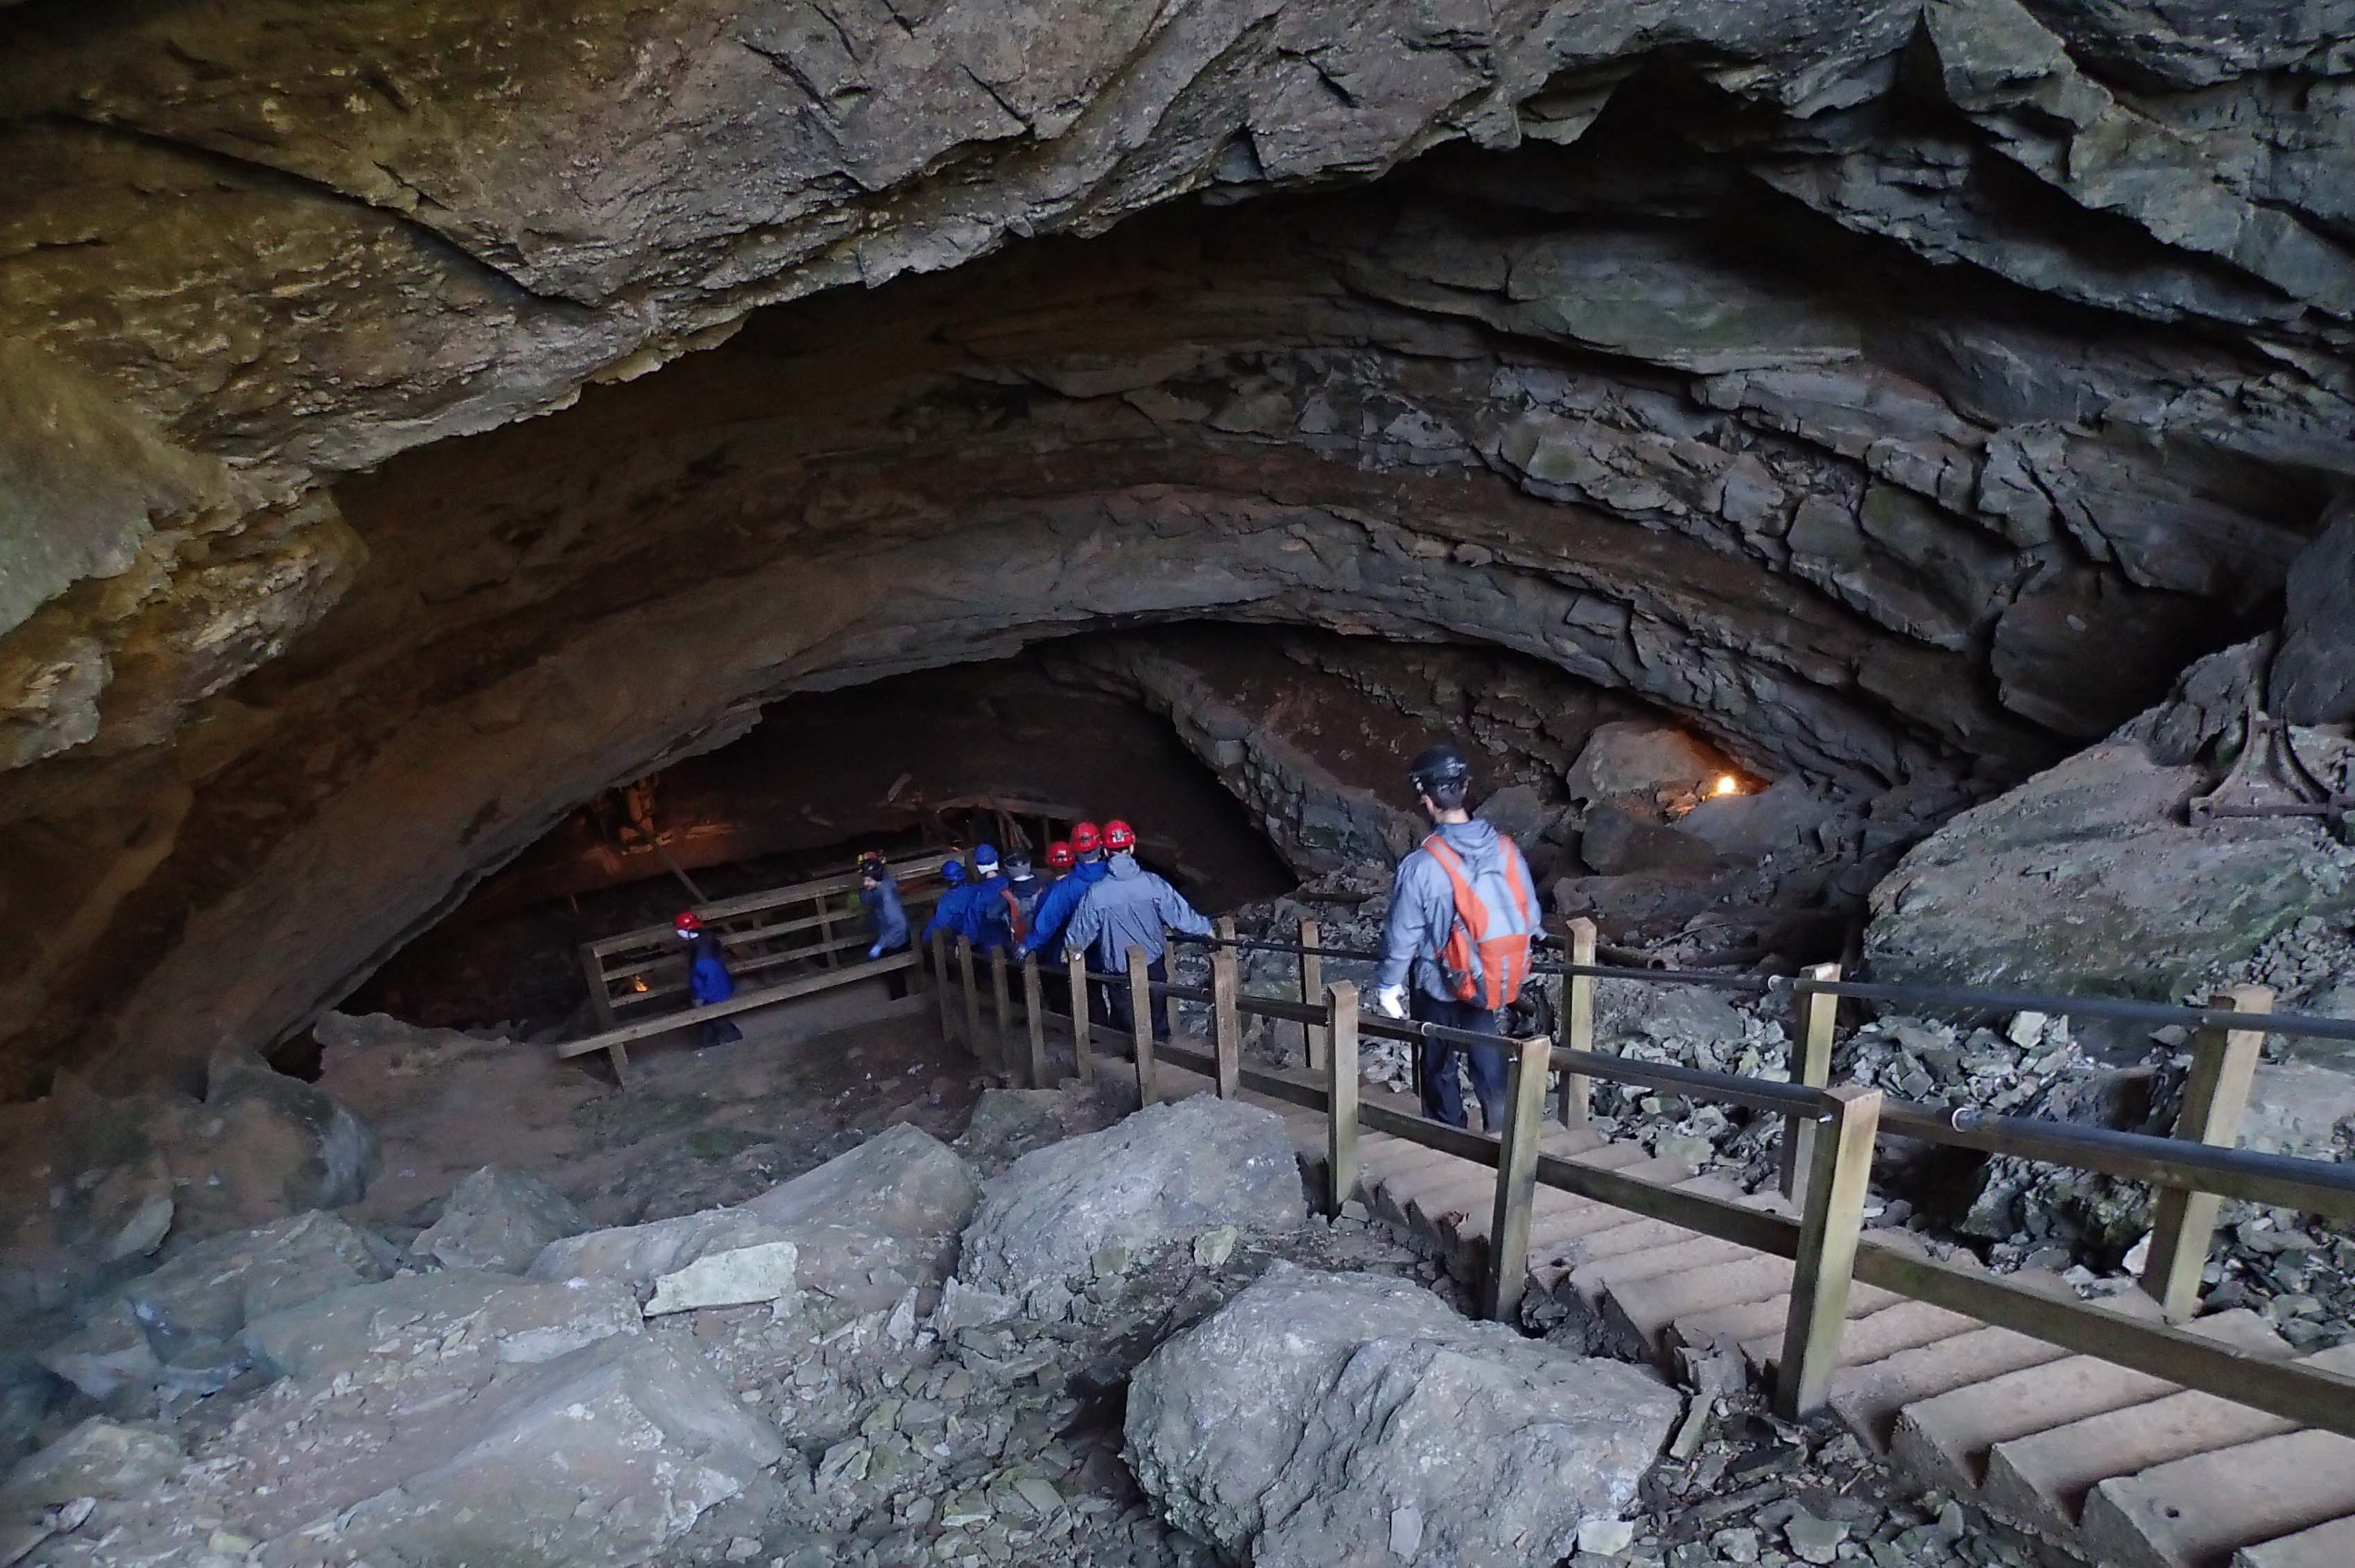 Mammoth Caves extended trip, November 19–22 - News - Illinois State